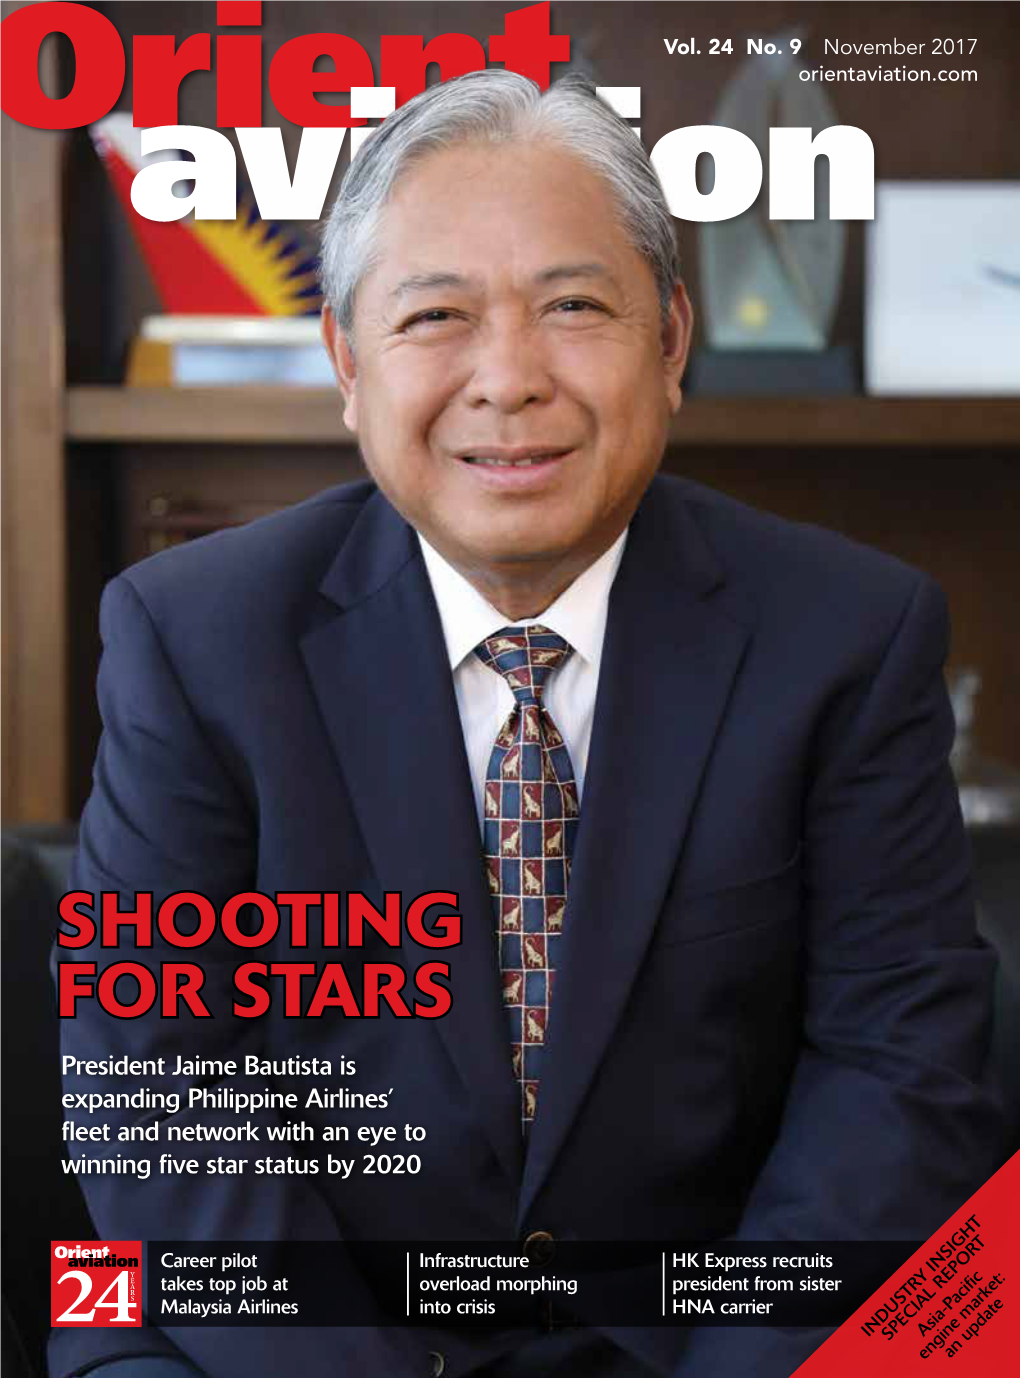 SHOOTING for STARS President Jaime Bautista Is Expanding Philippine Airlines’ Fleet and Network with an Eye to Winning Five Star Status by 2020